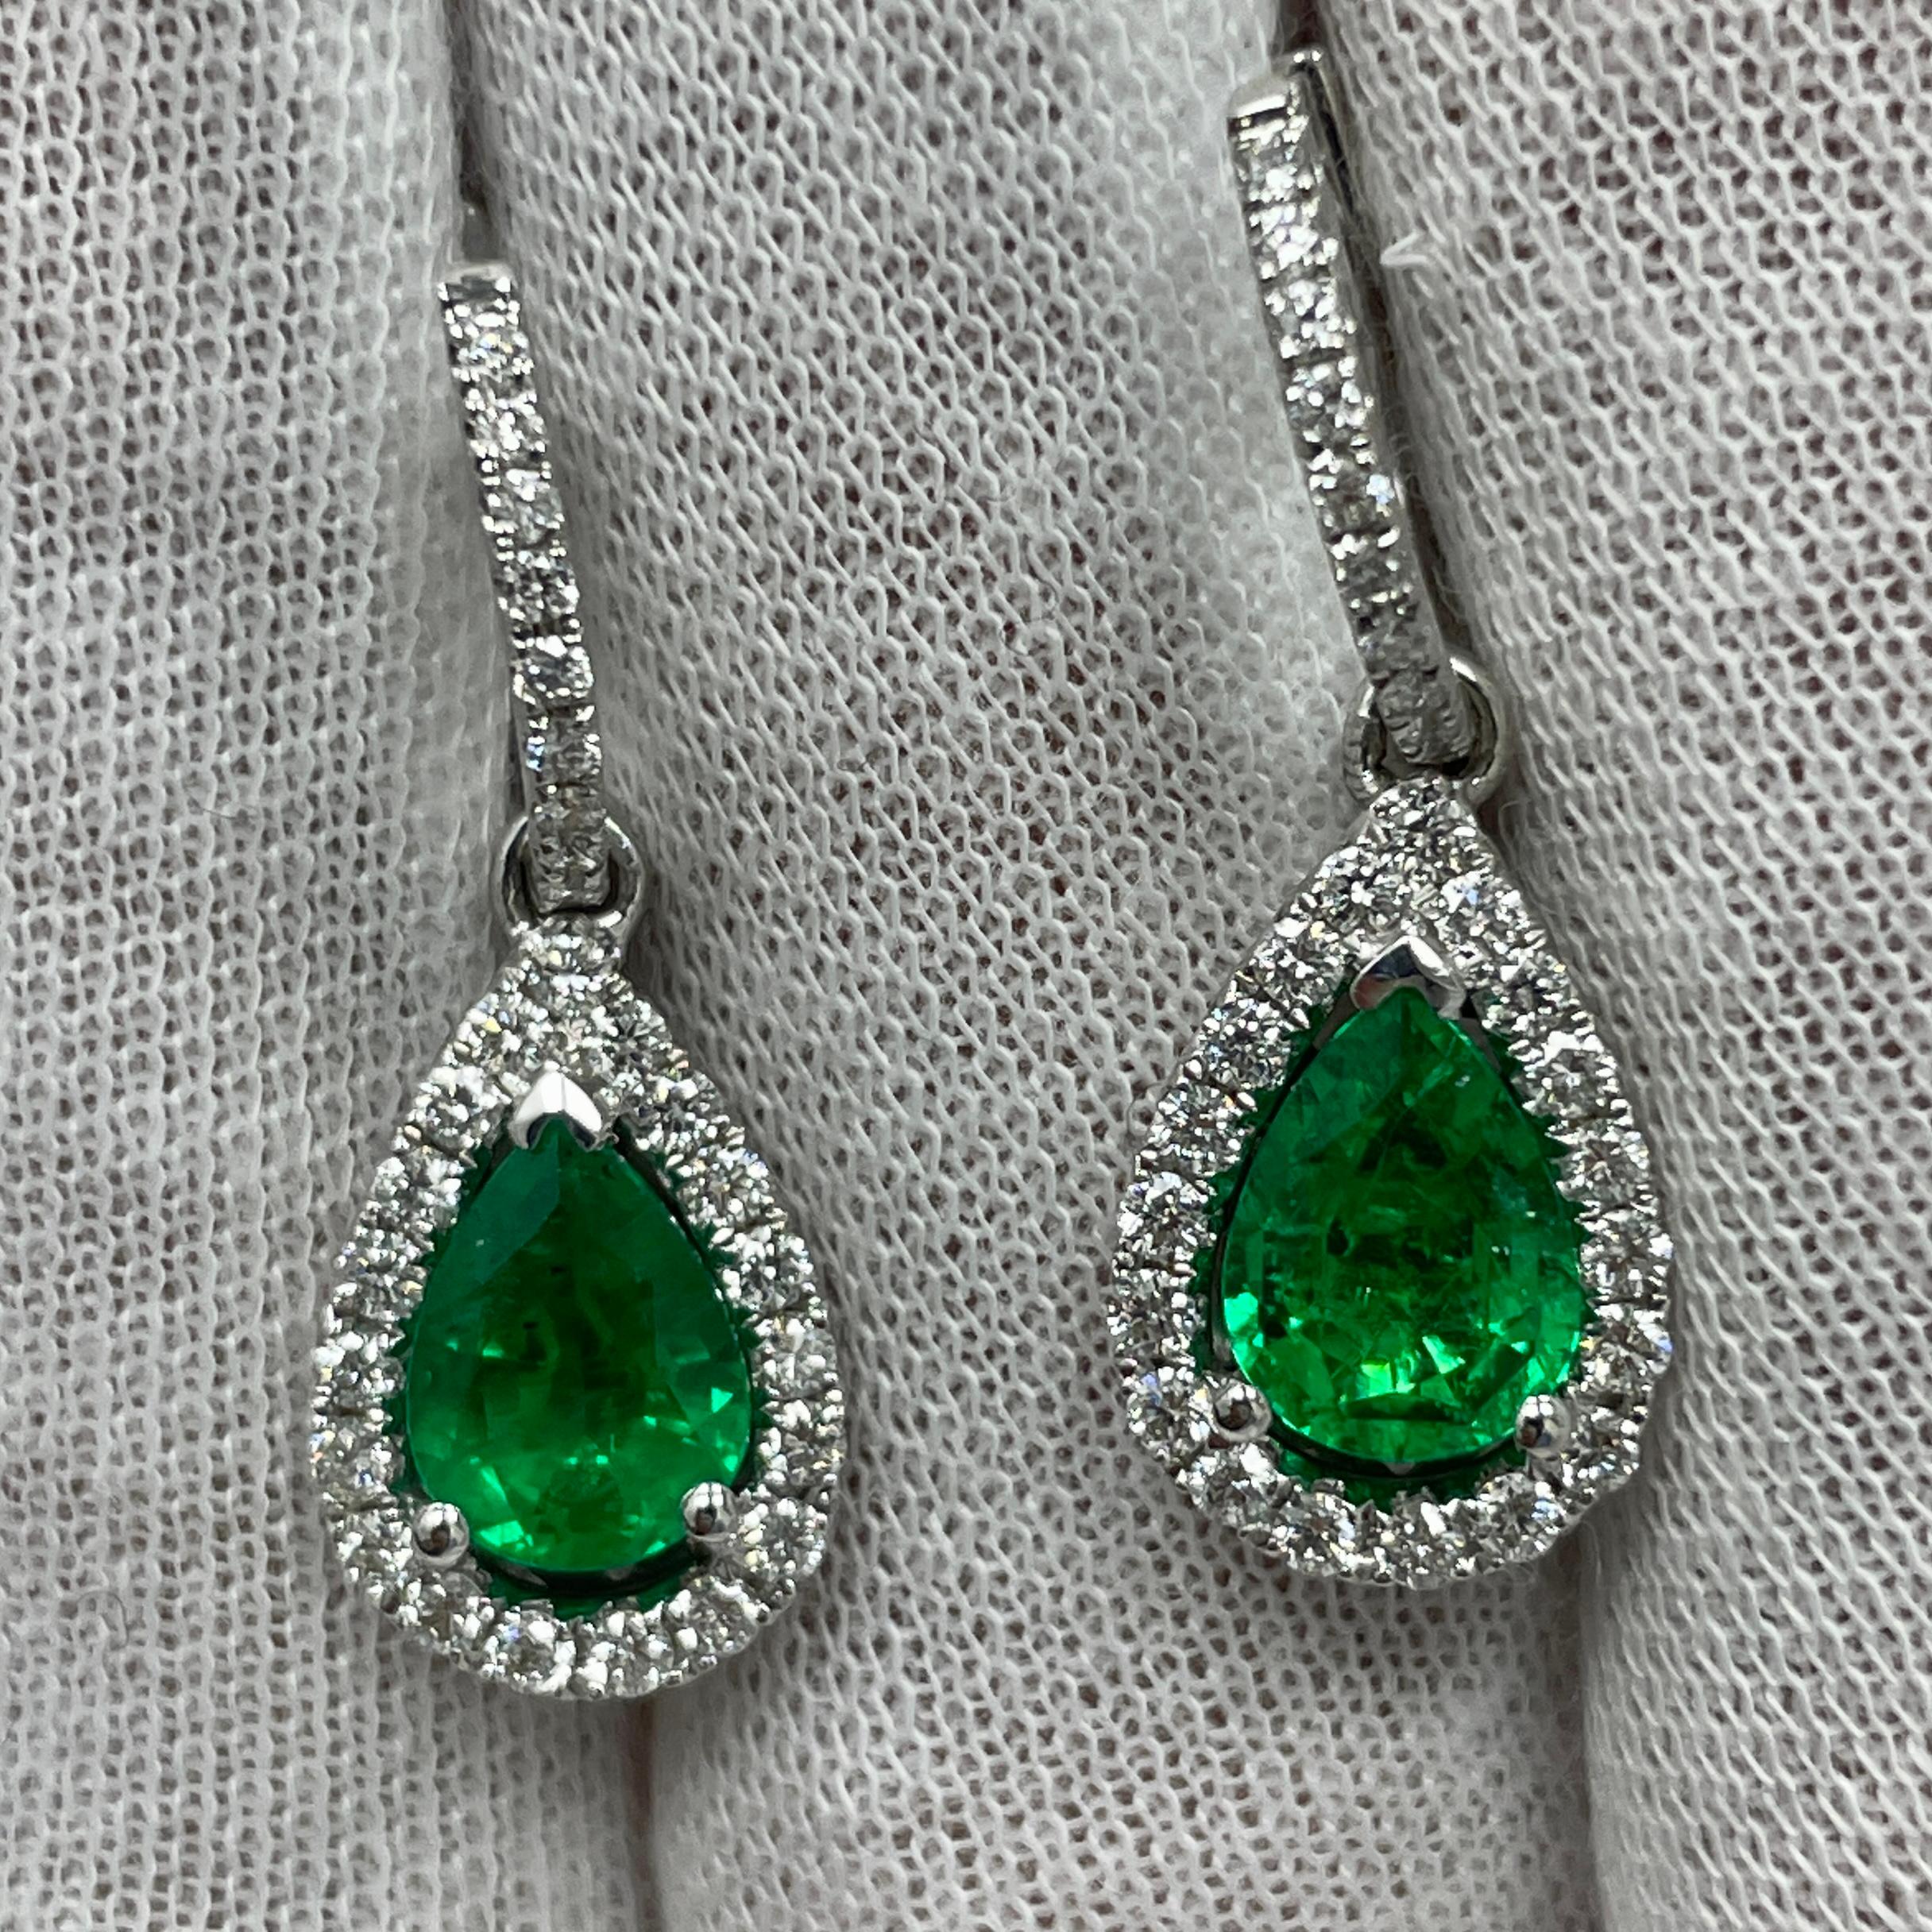 These dangling 18K white gold earrings carry .78Ct of brilliant white diamonds and 1.80Ct of stunning matching pear shape emeralds